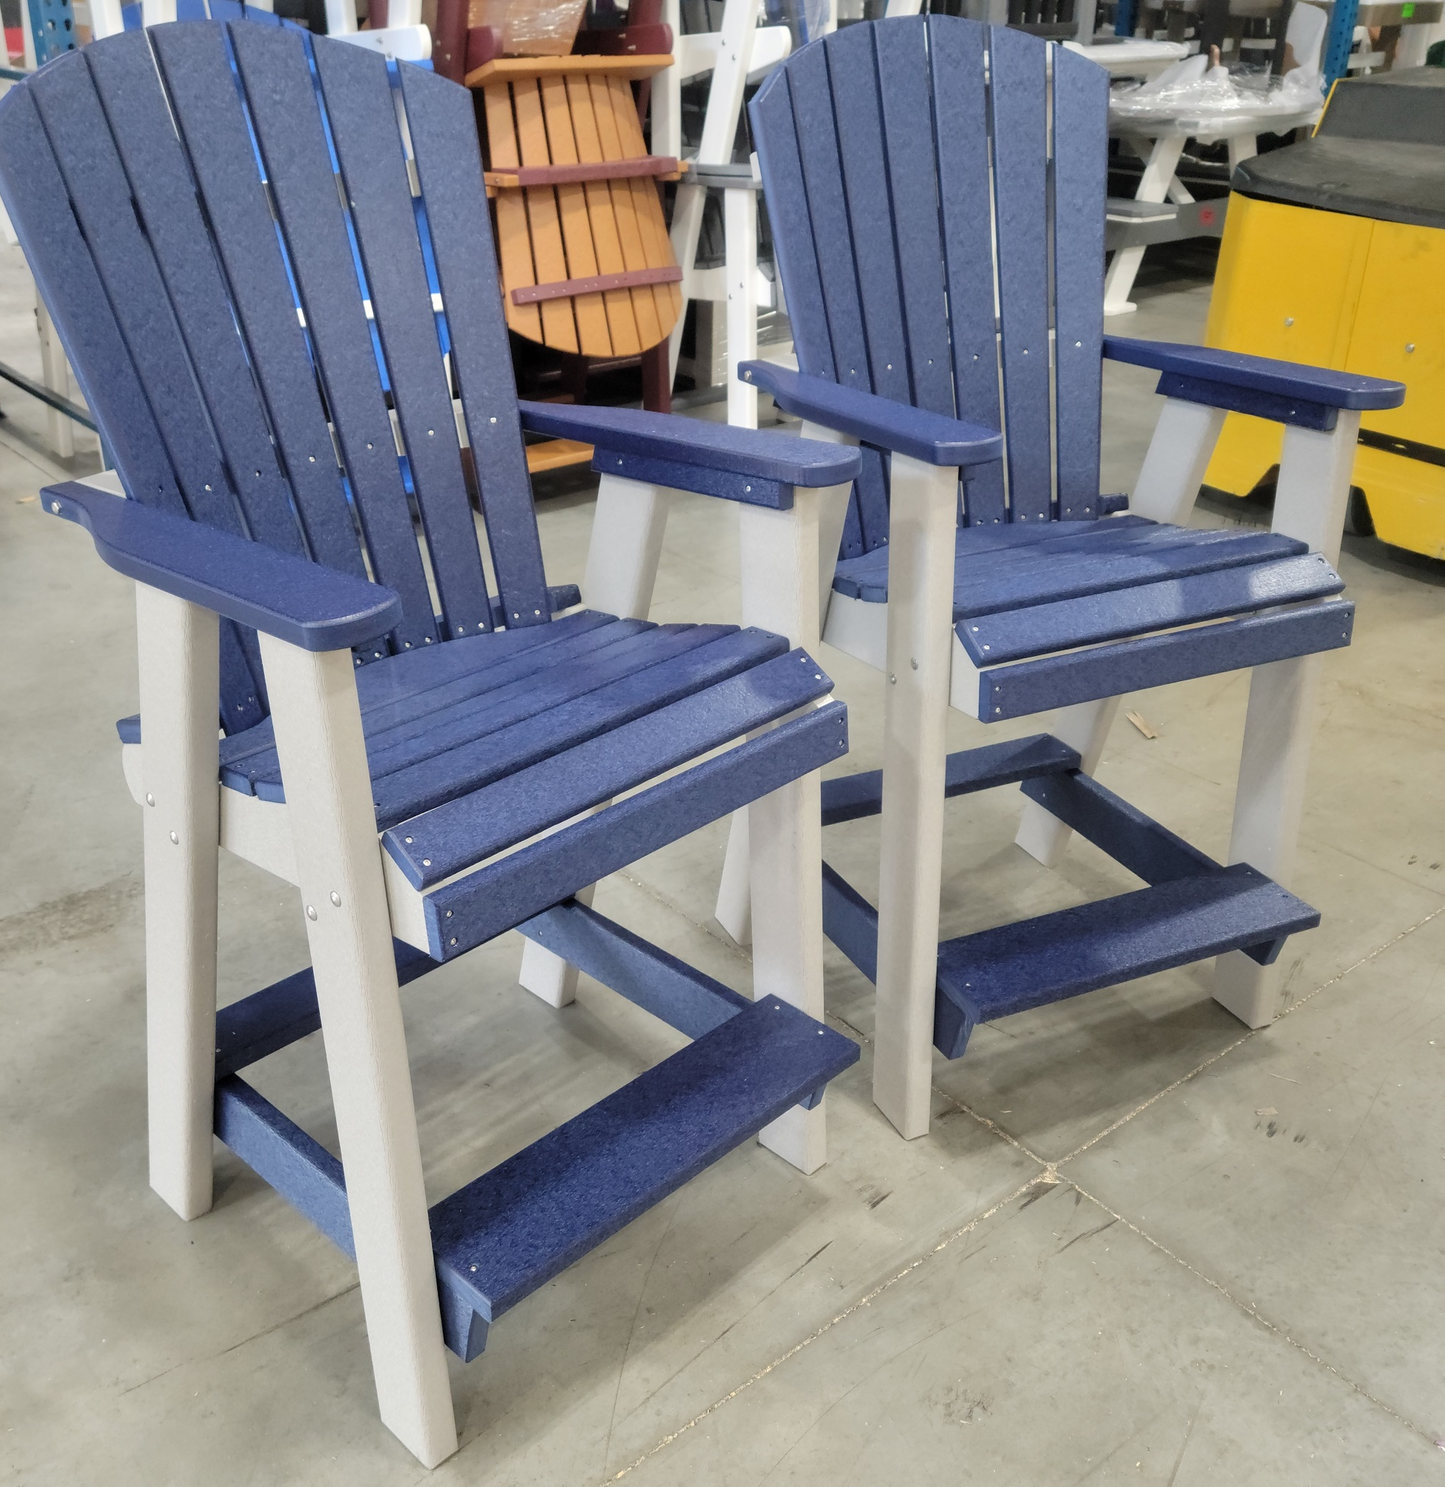 Leisure Lawns Amish Made Recycled Plastic Balcony Chair (BAR HEIGHT) Model #321B - LEAD TIME TO SHIP 6 WEEKS OR LESS